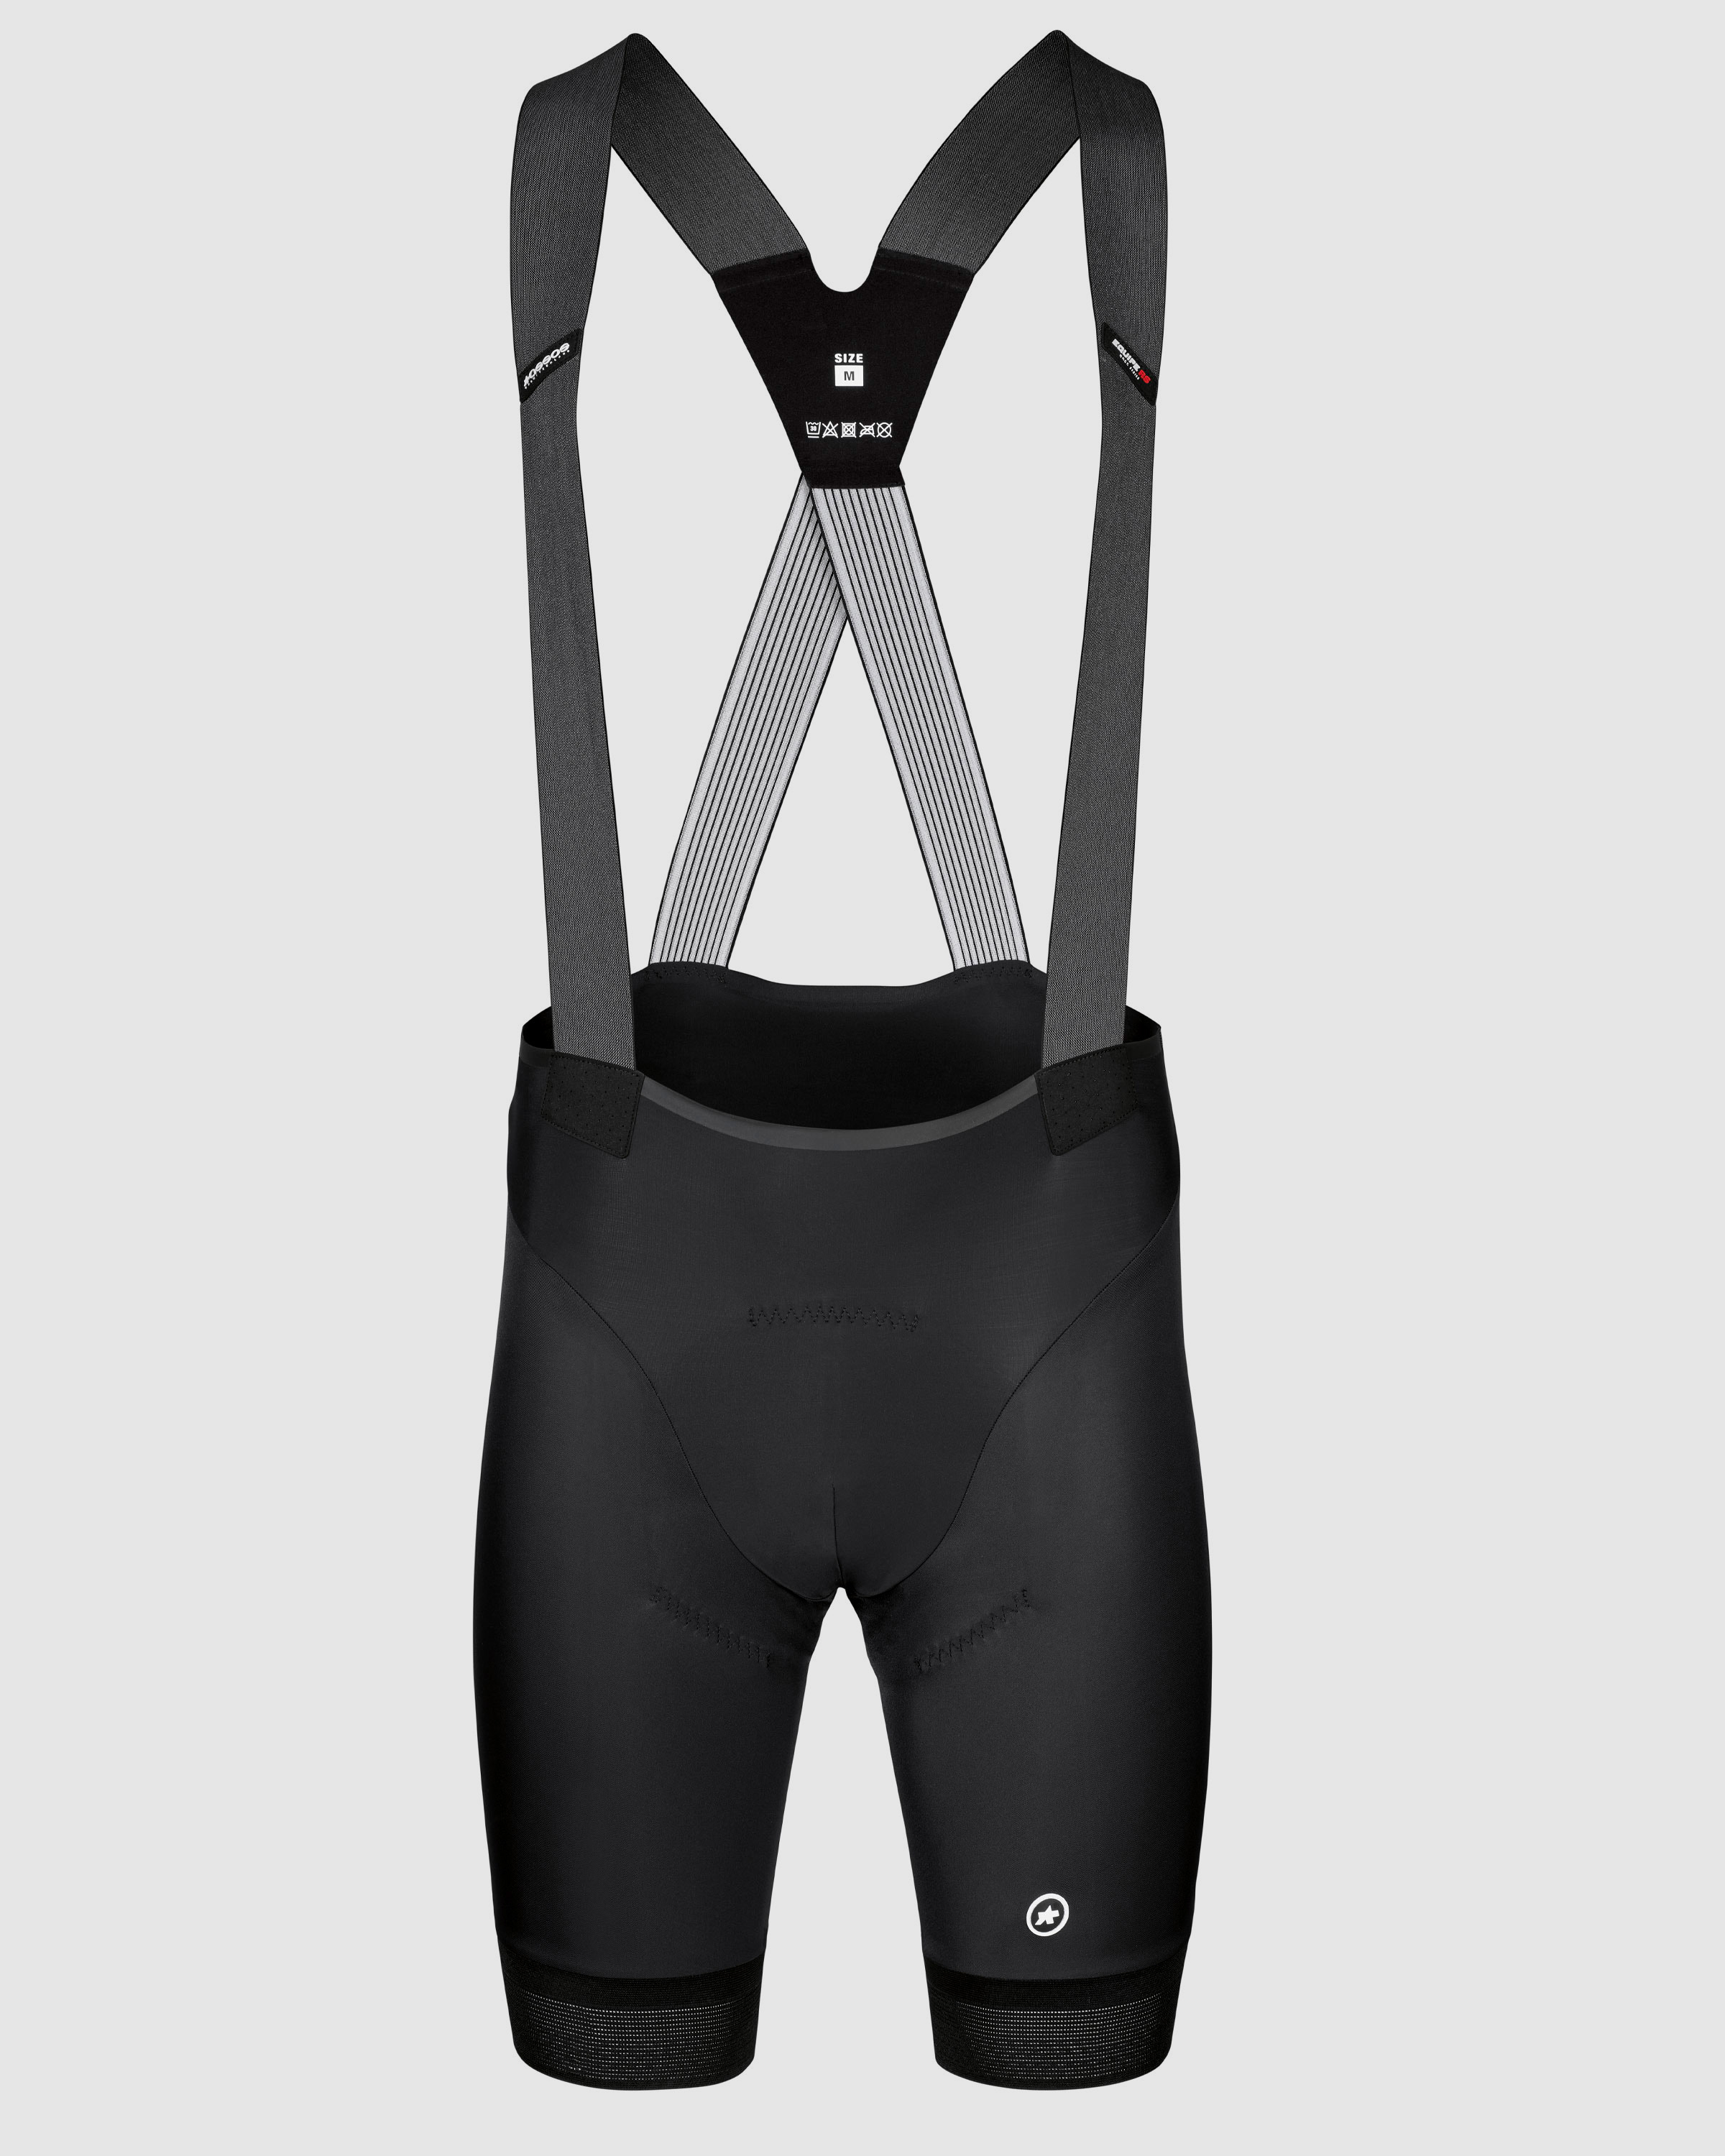 EQUIPE RS Bib Shorts Werksteam S9 - ASSOS Of Switzerland - Official Outlet